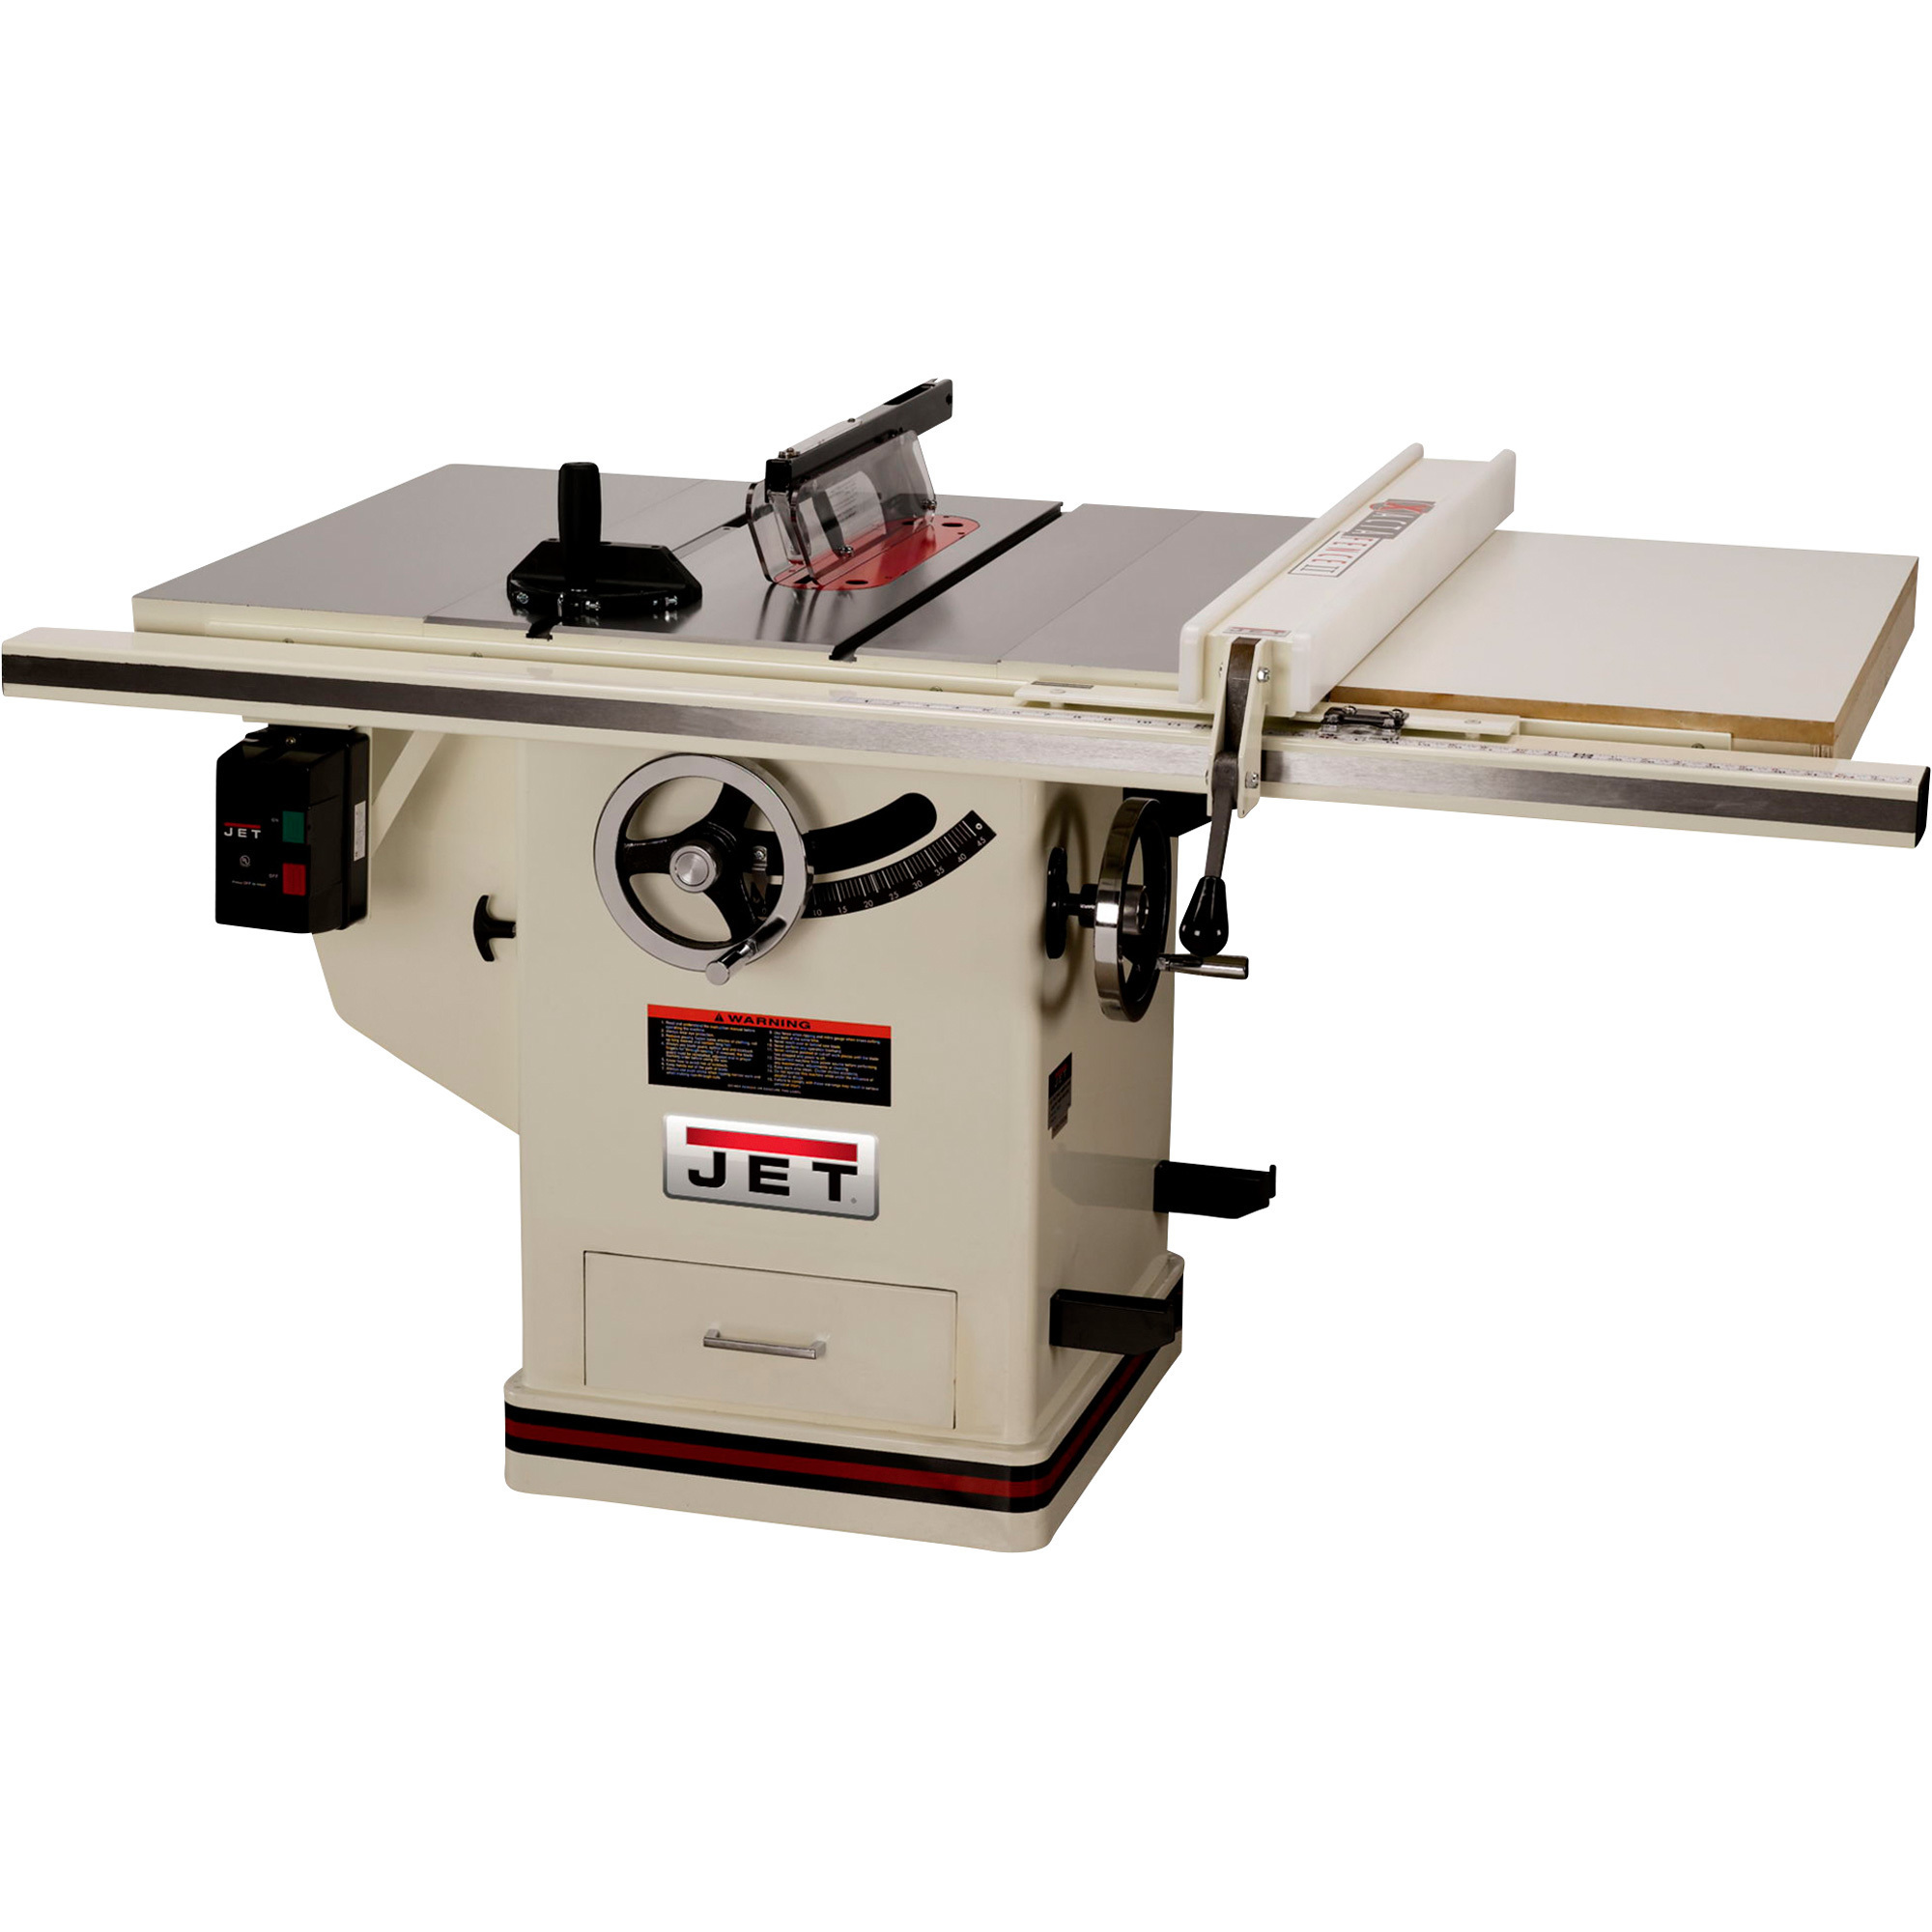 JET Deluxe XACTASAW Table Saw, 10Inch, Model JTAS-10XL-DX